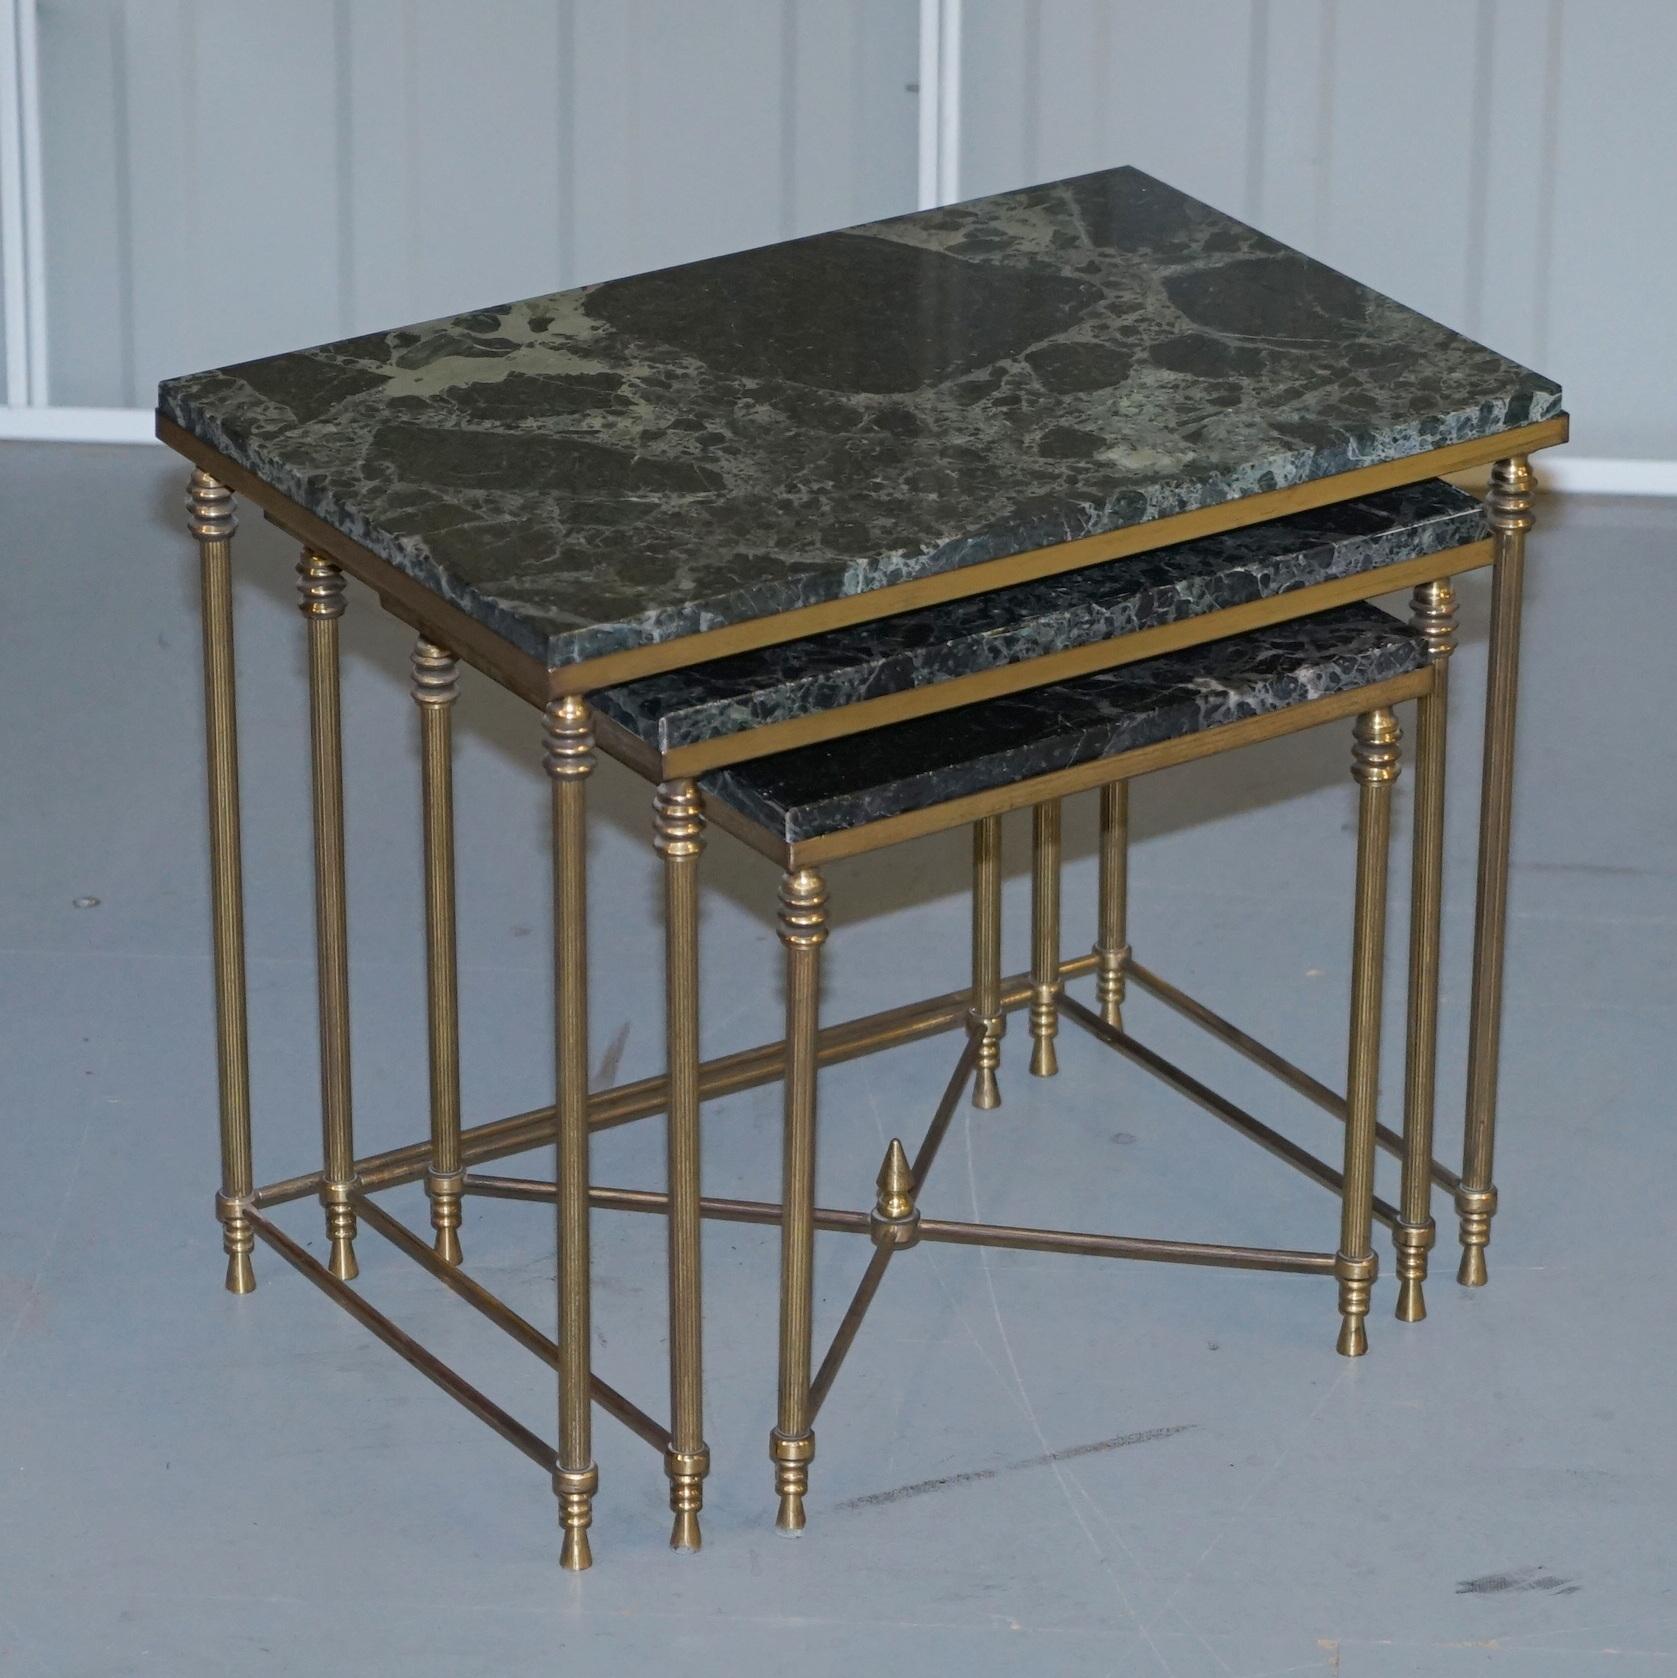 We are delighted to this stunning rare set of three original circa 1940 Italian brass nesting tables with thick green marble tops

An exquisite example, very elegant and nicely proportioned, the marble tops are oversized and recess outside the